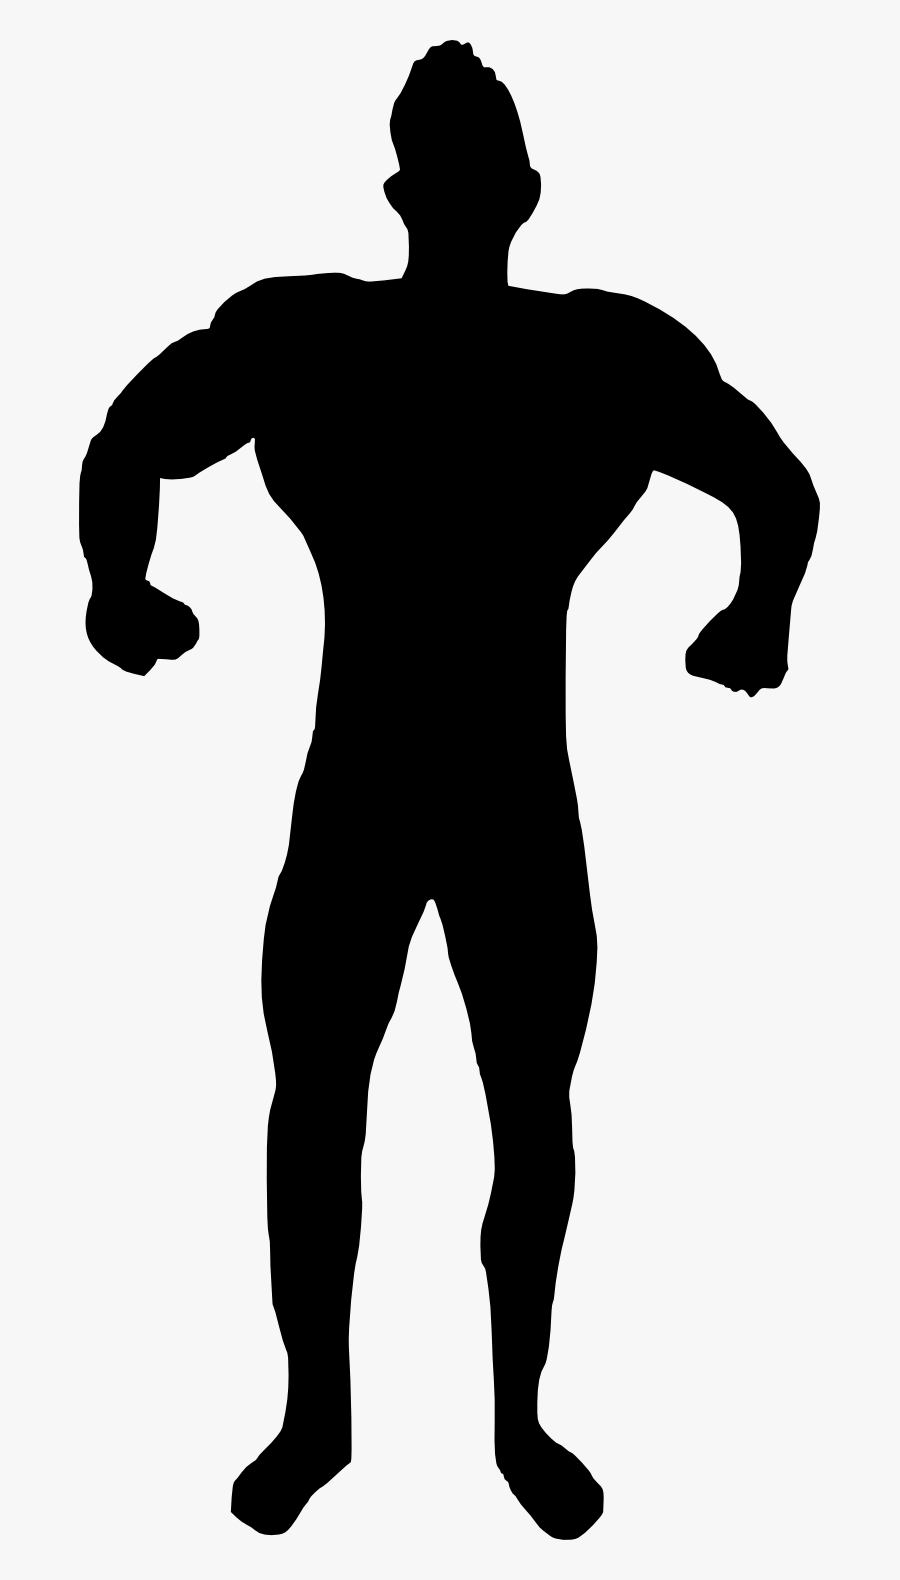 Muscle Man Silhouette Clipart - Silhouette Of Bodybuilder Png, Transparent Clipart